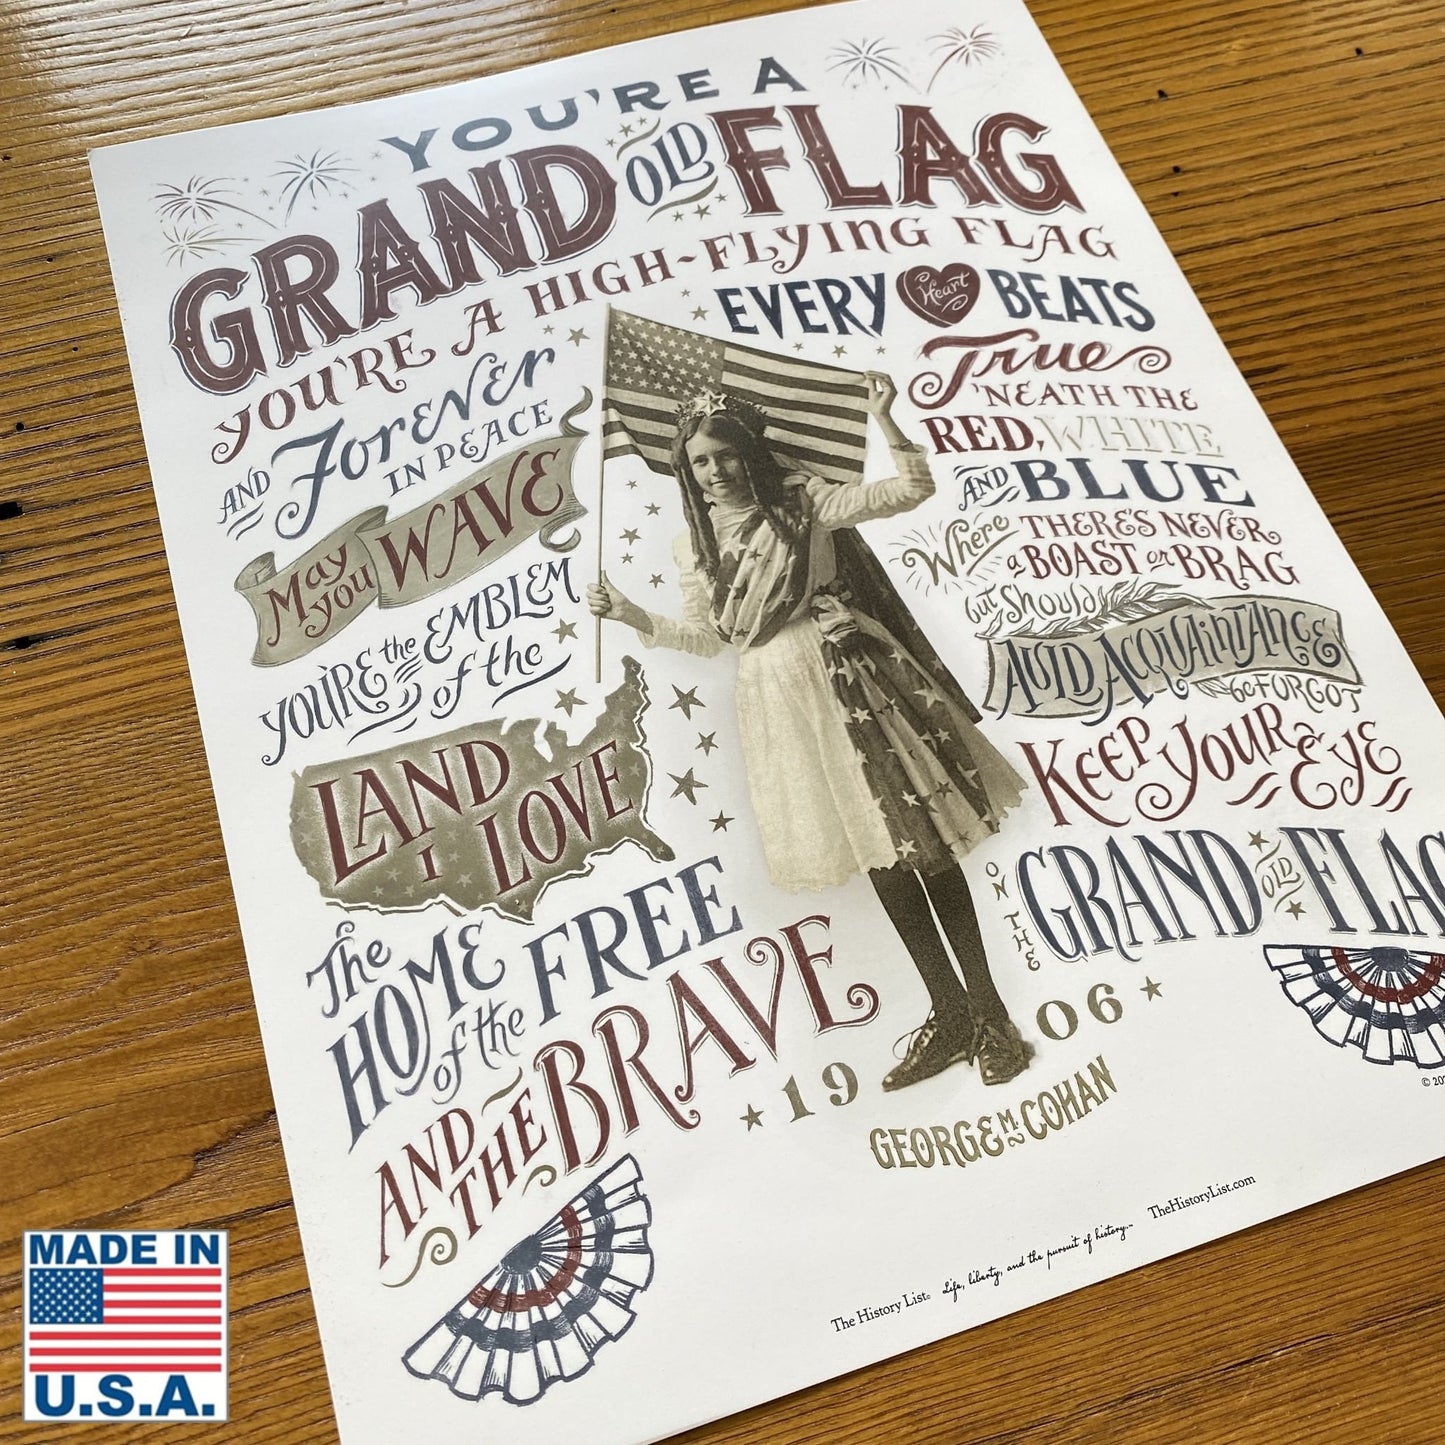 Full image "Grand Old Flag" as a small poster from the history list store